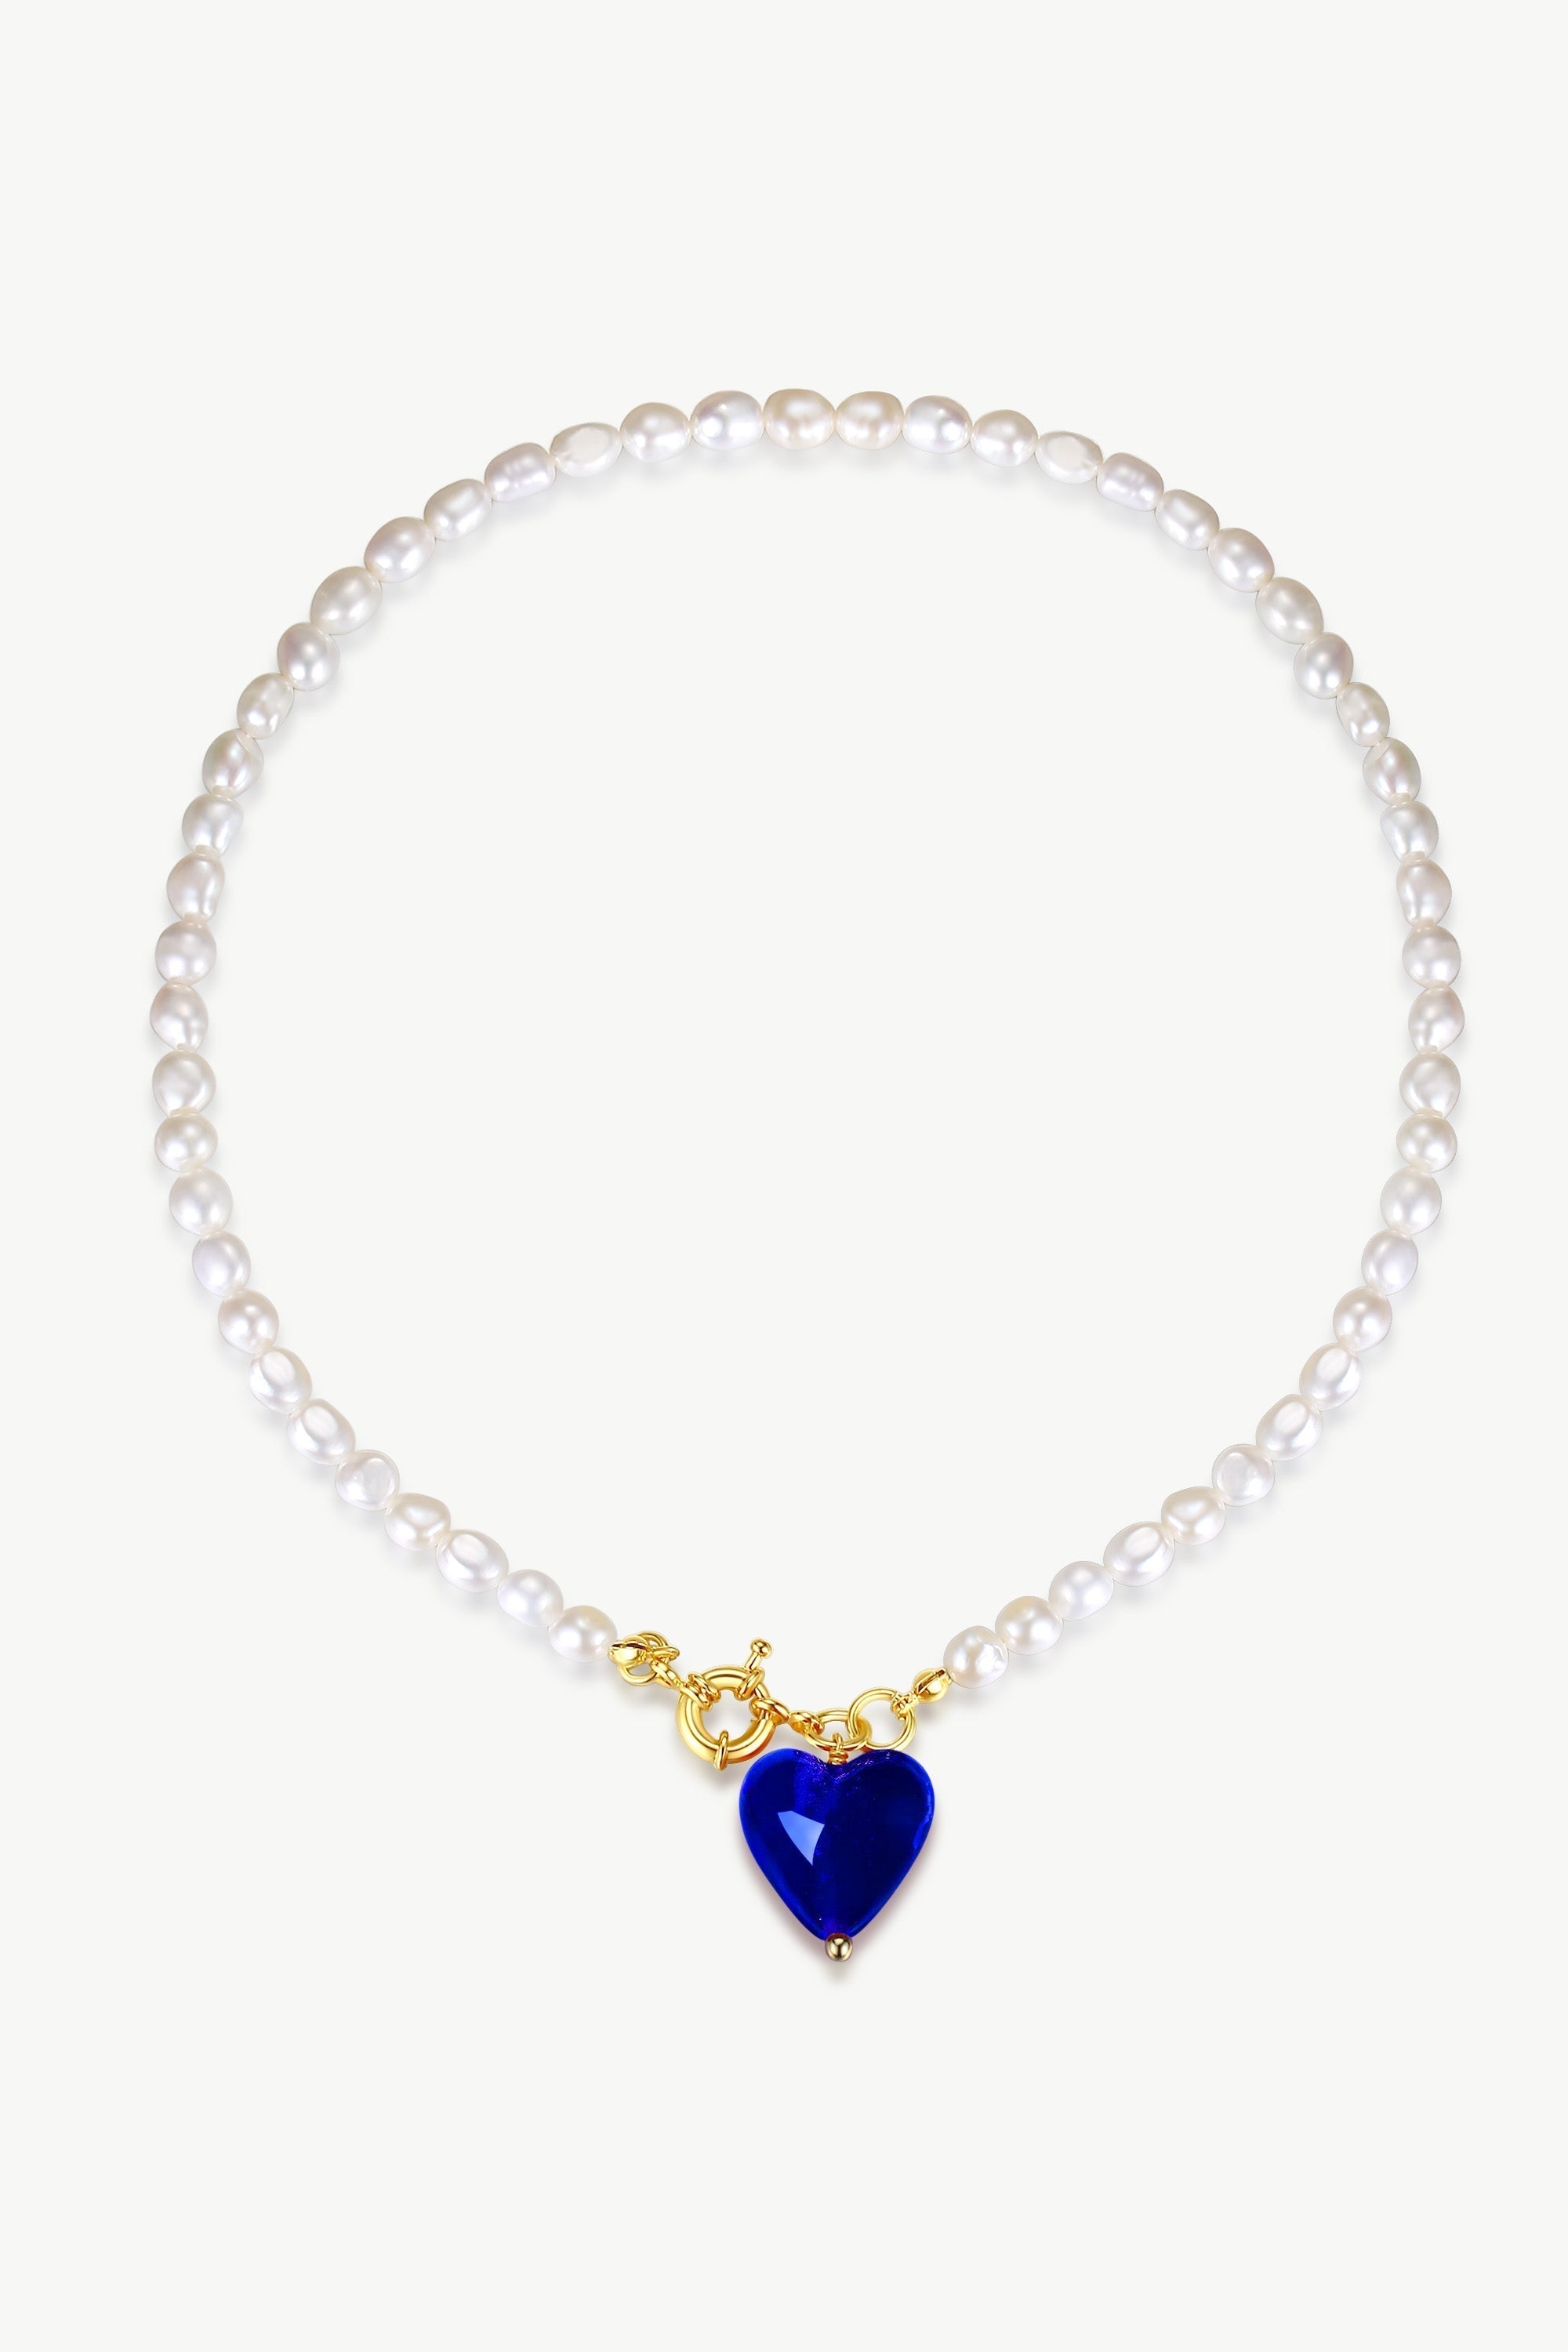 Silver Heart Freshwater Pearl Necklace | Classy Women Collection